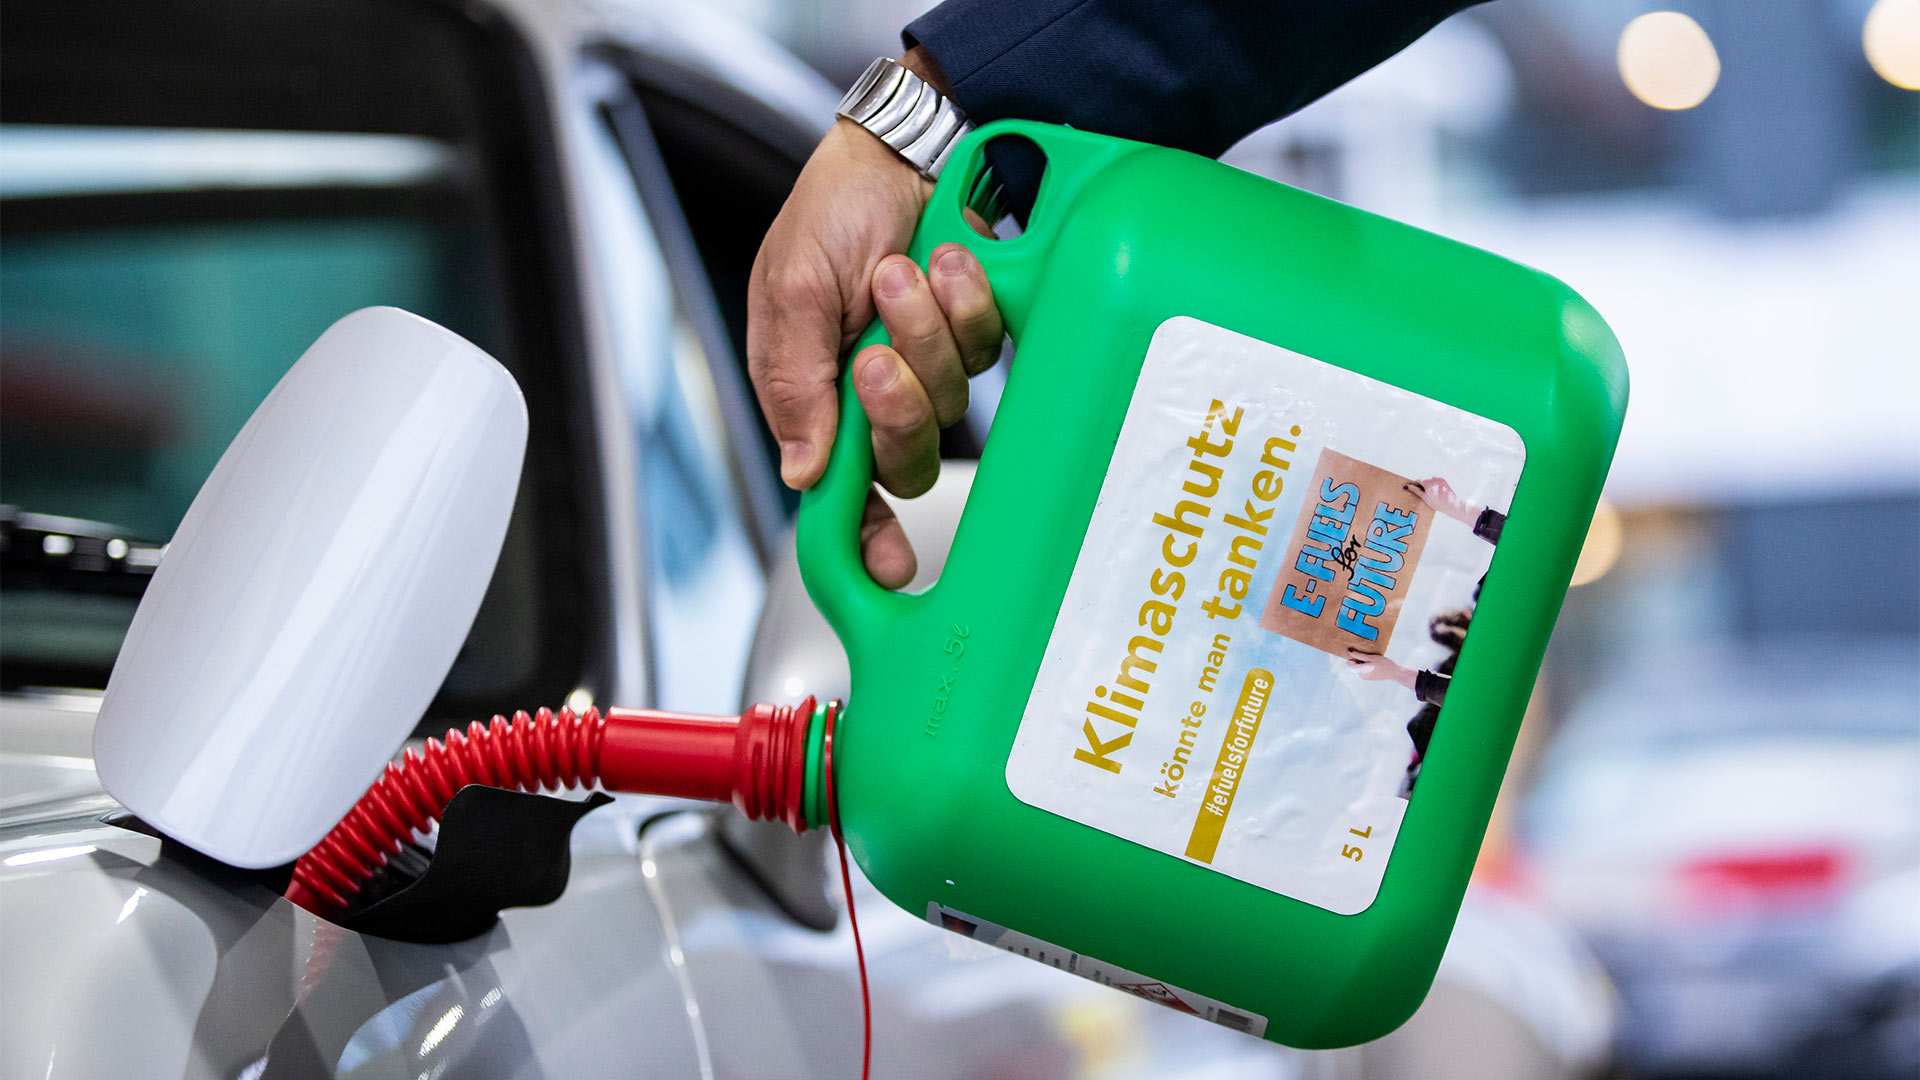 Kanister mit E-Fuel | picture alliance/dpa